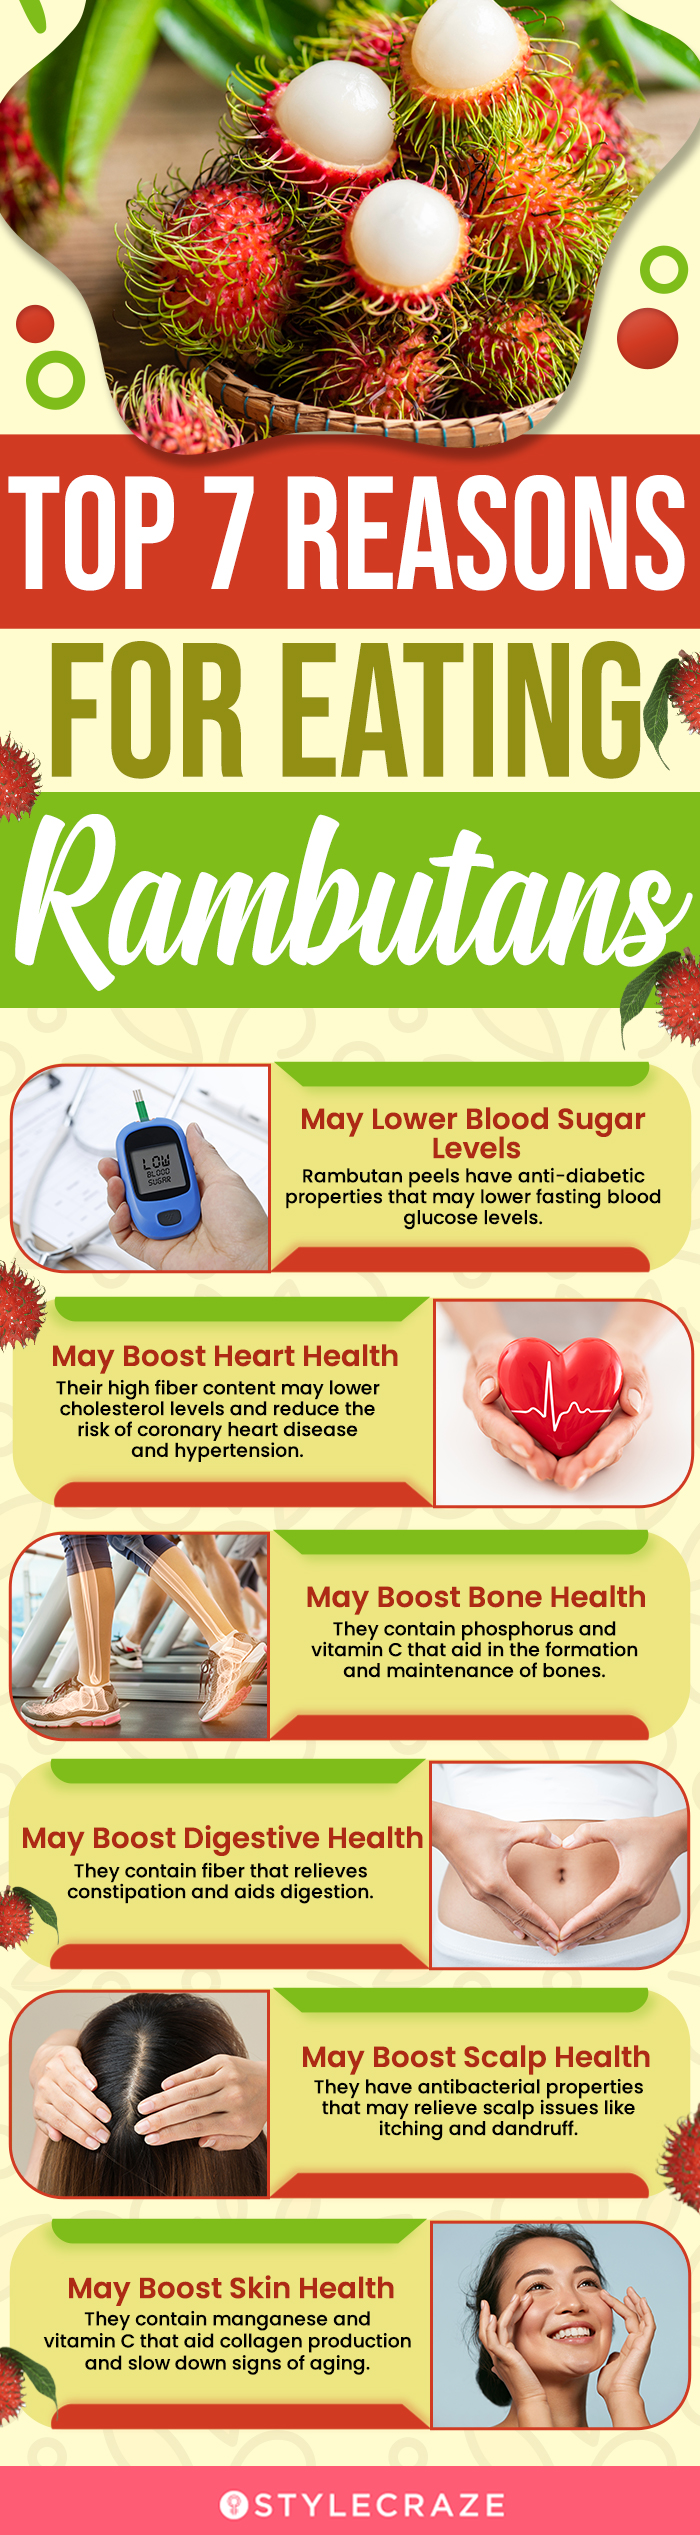 top 7 reasons for eating rambutans (infographic)